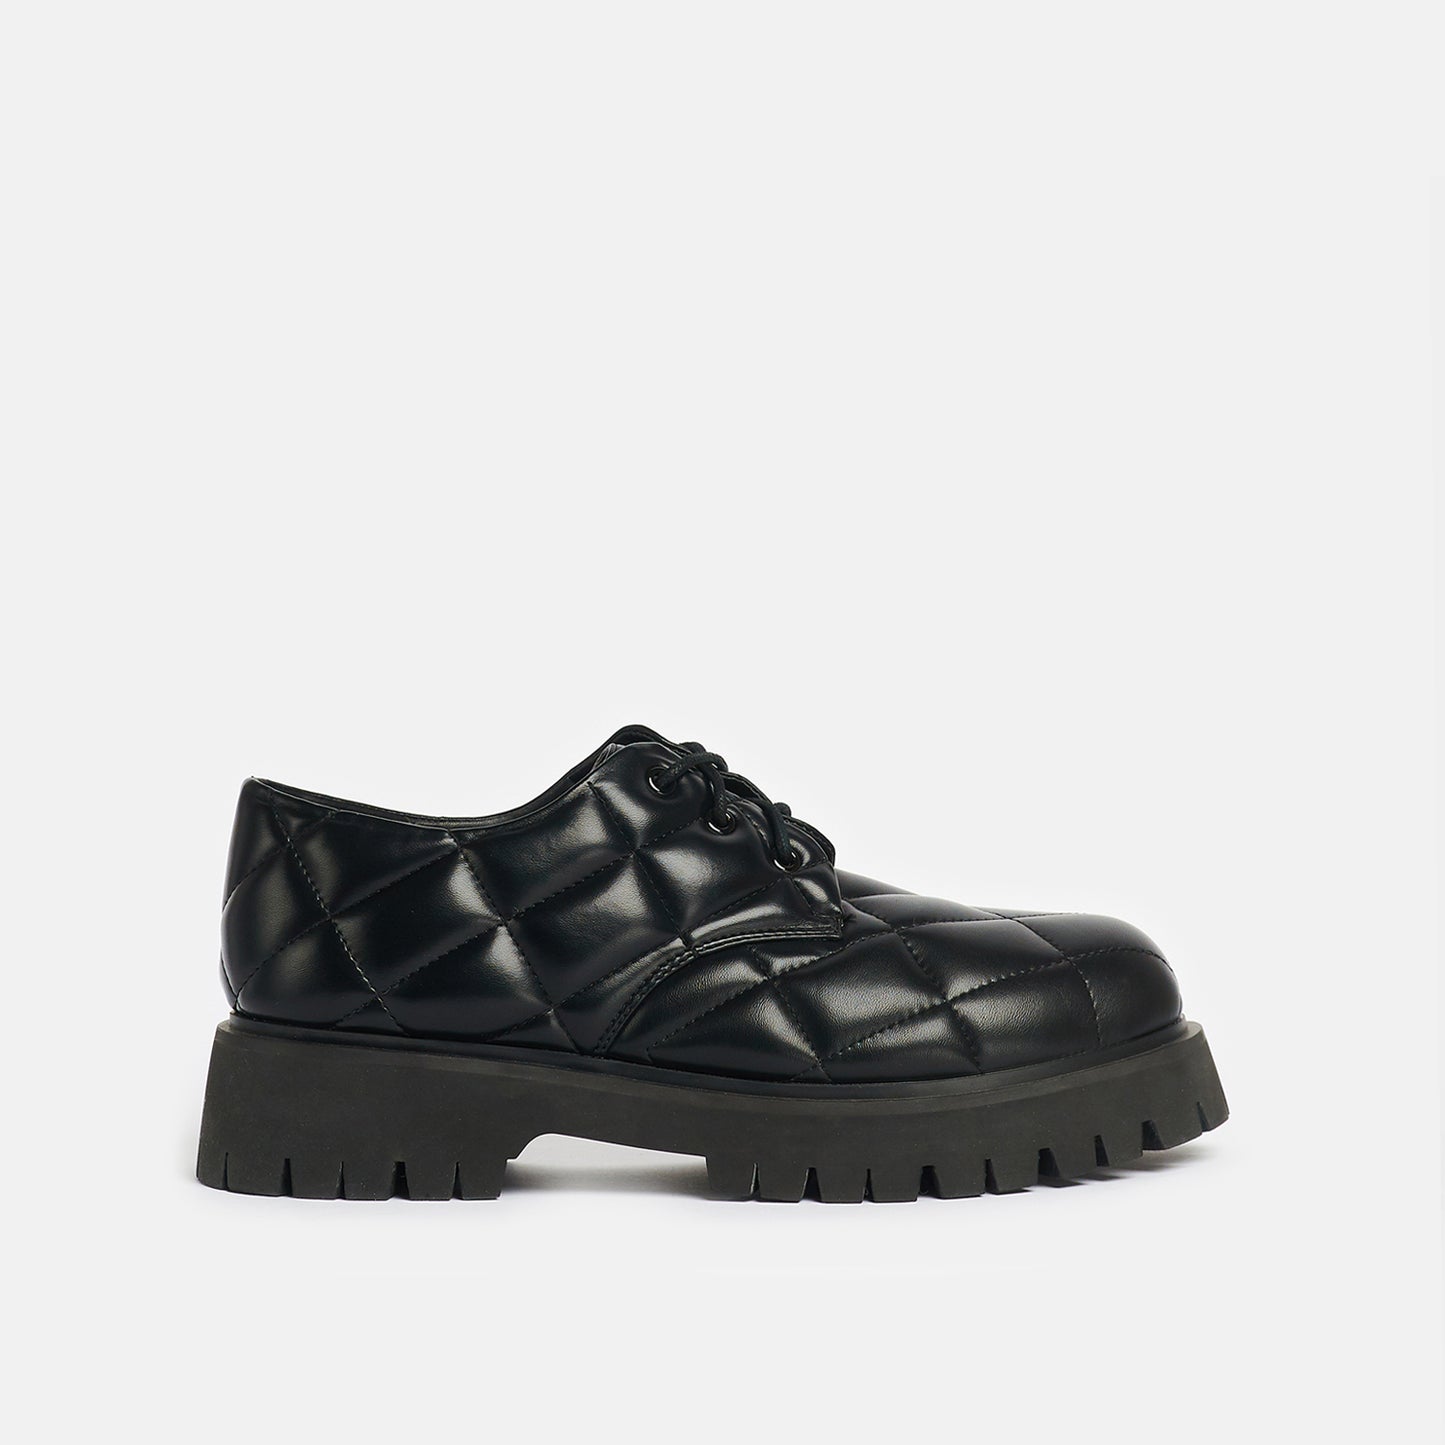 The Snug Cave Men's Black Quilted Shoes - Shoes - KOI Footwear - Black - Side View